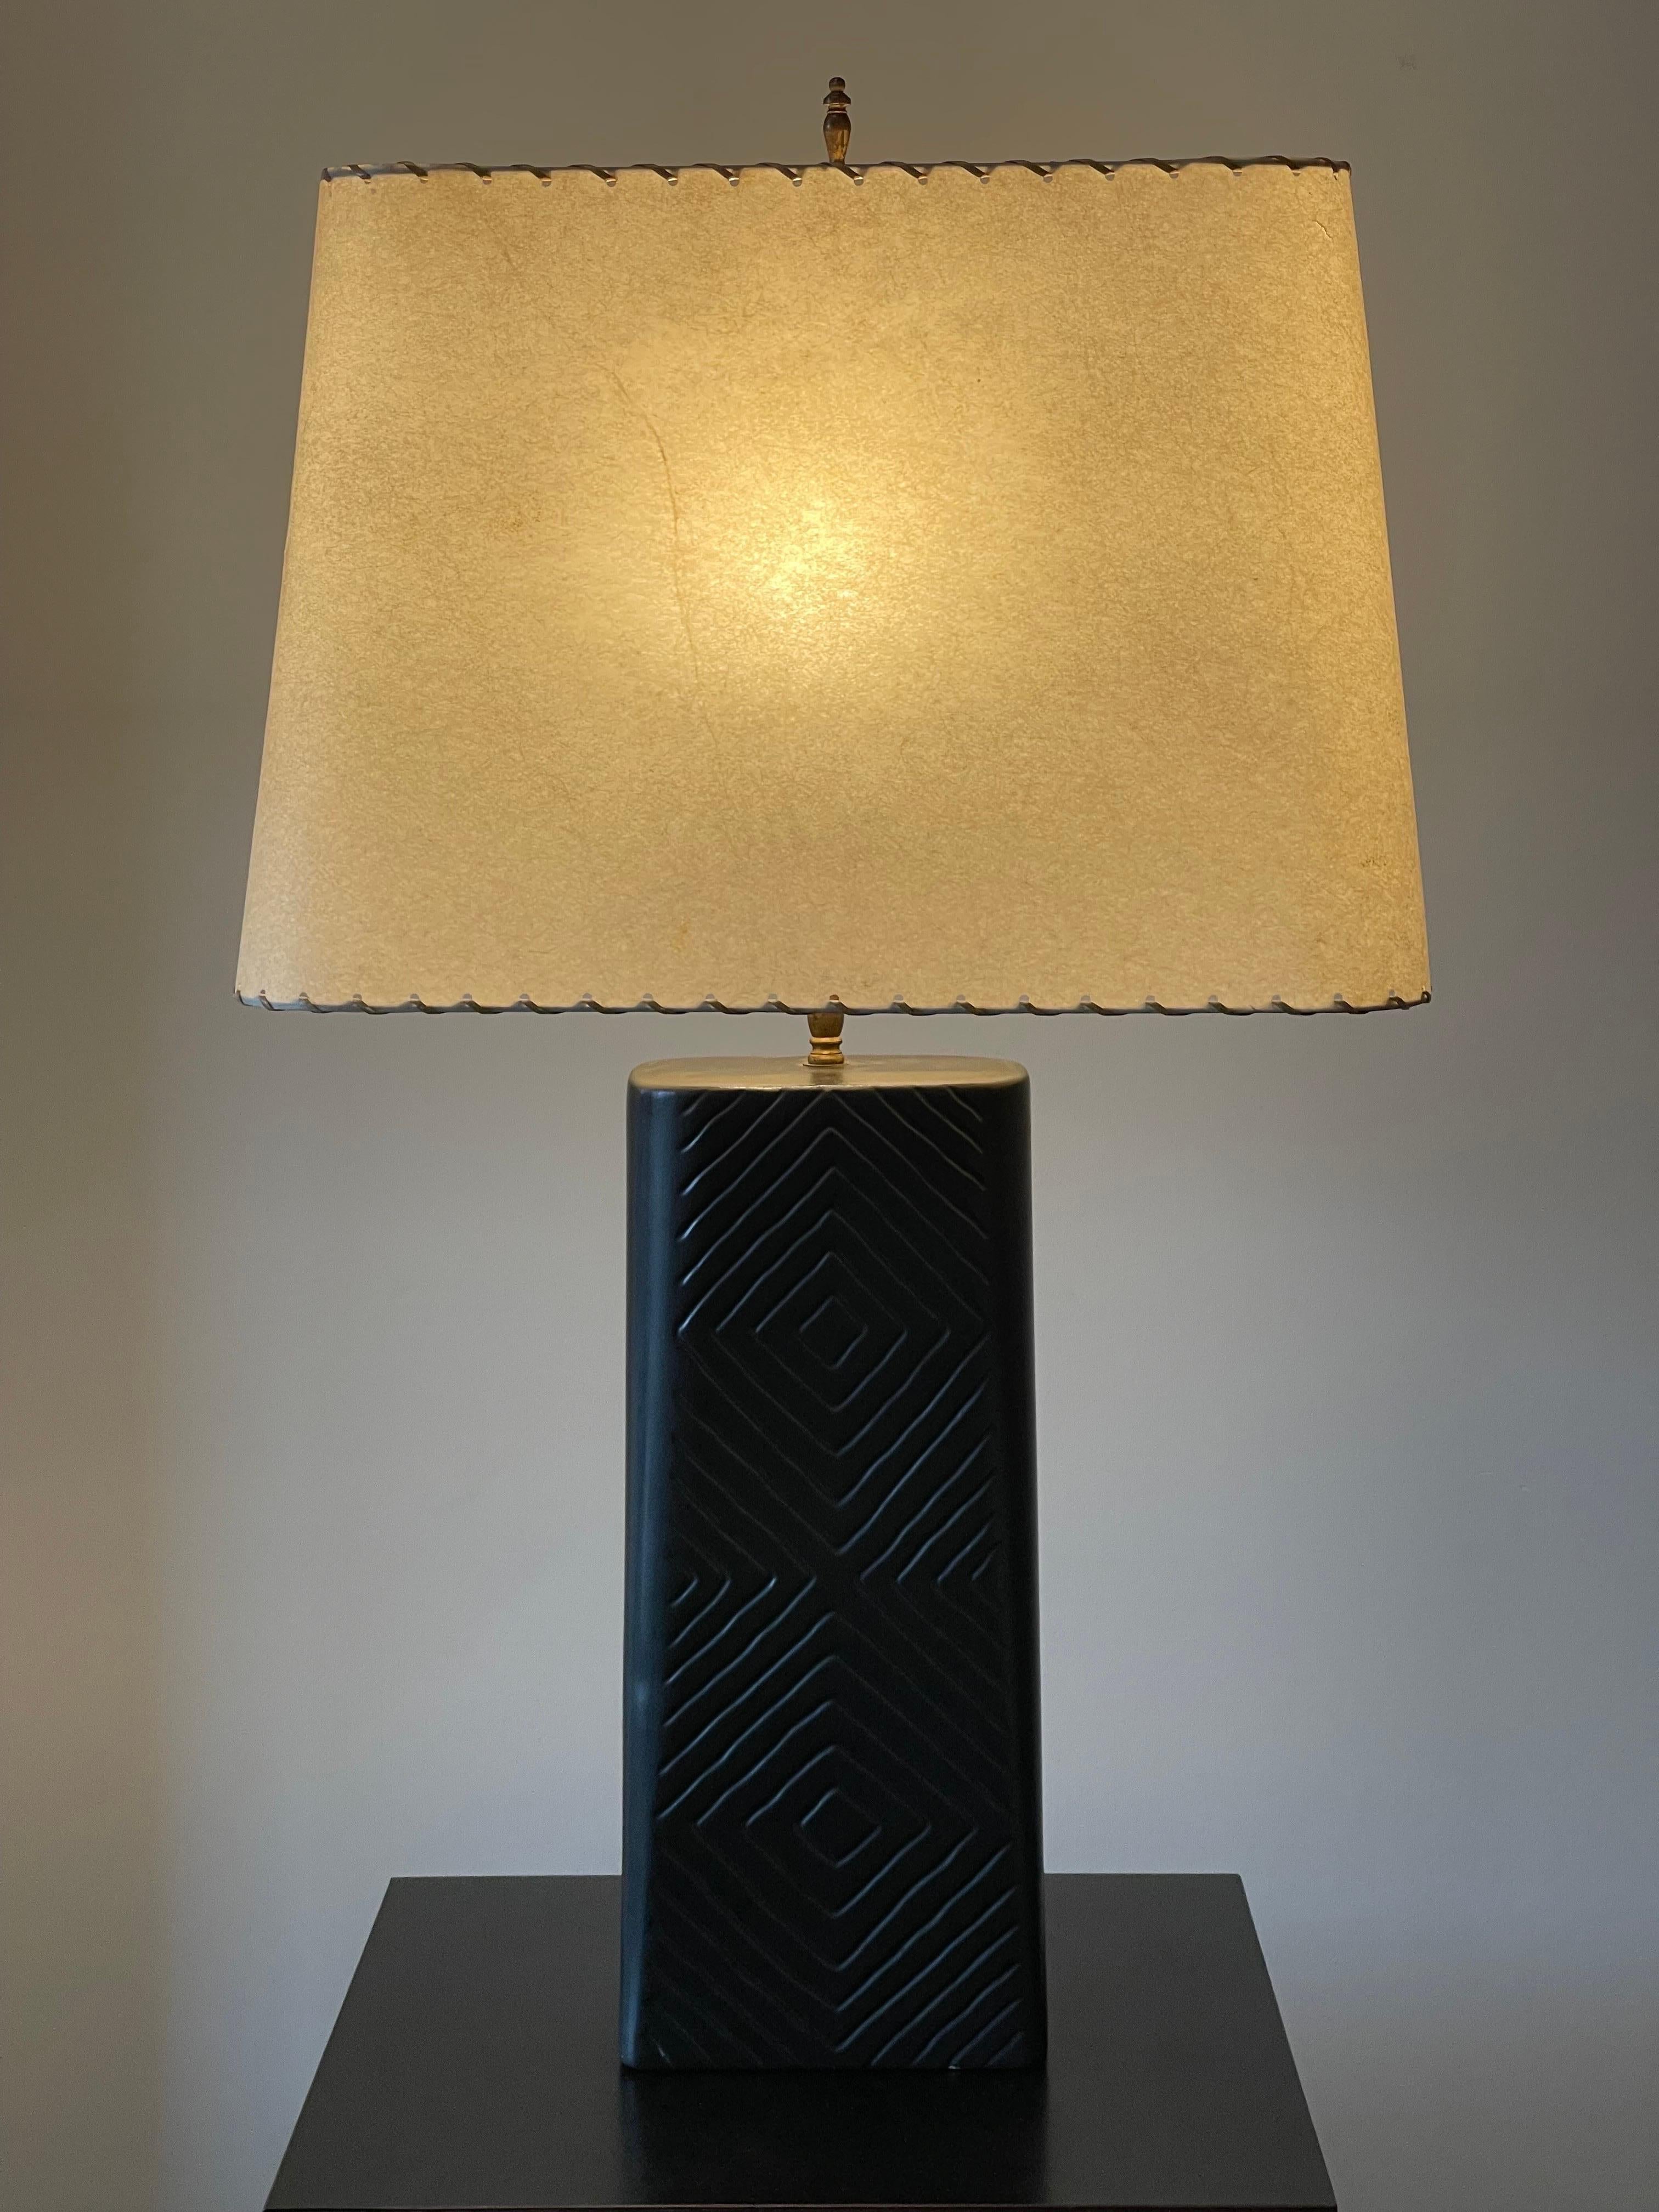 Large Mid-Century Modern Ceramic Table Lamp with Original Shade  For Sale 1